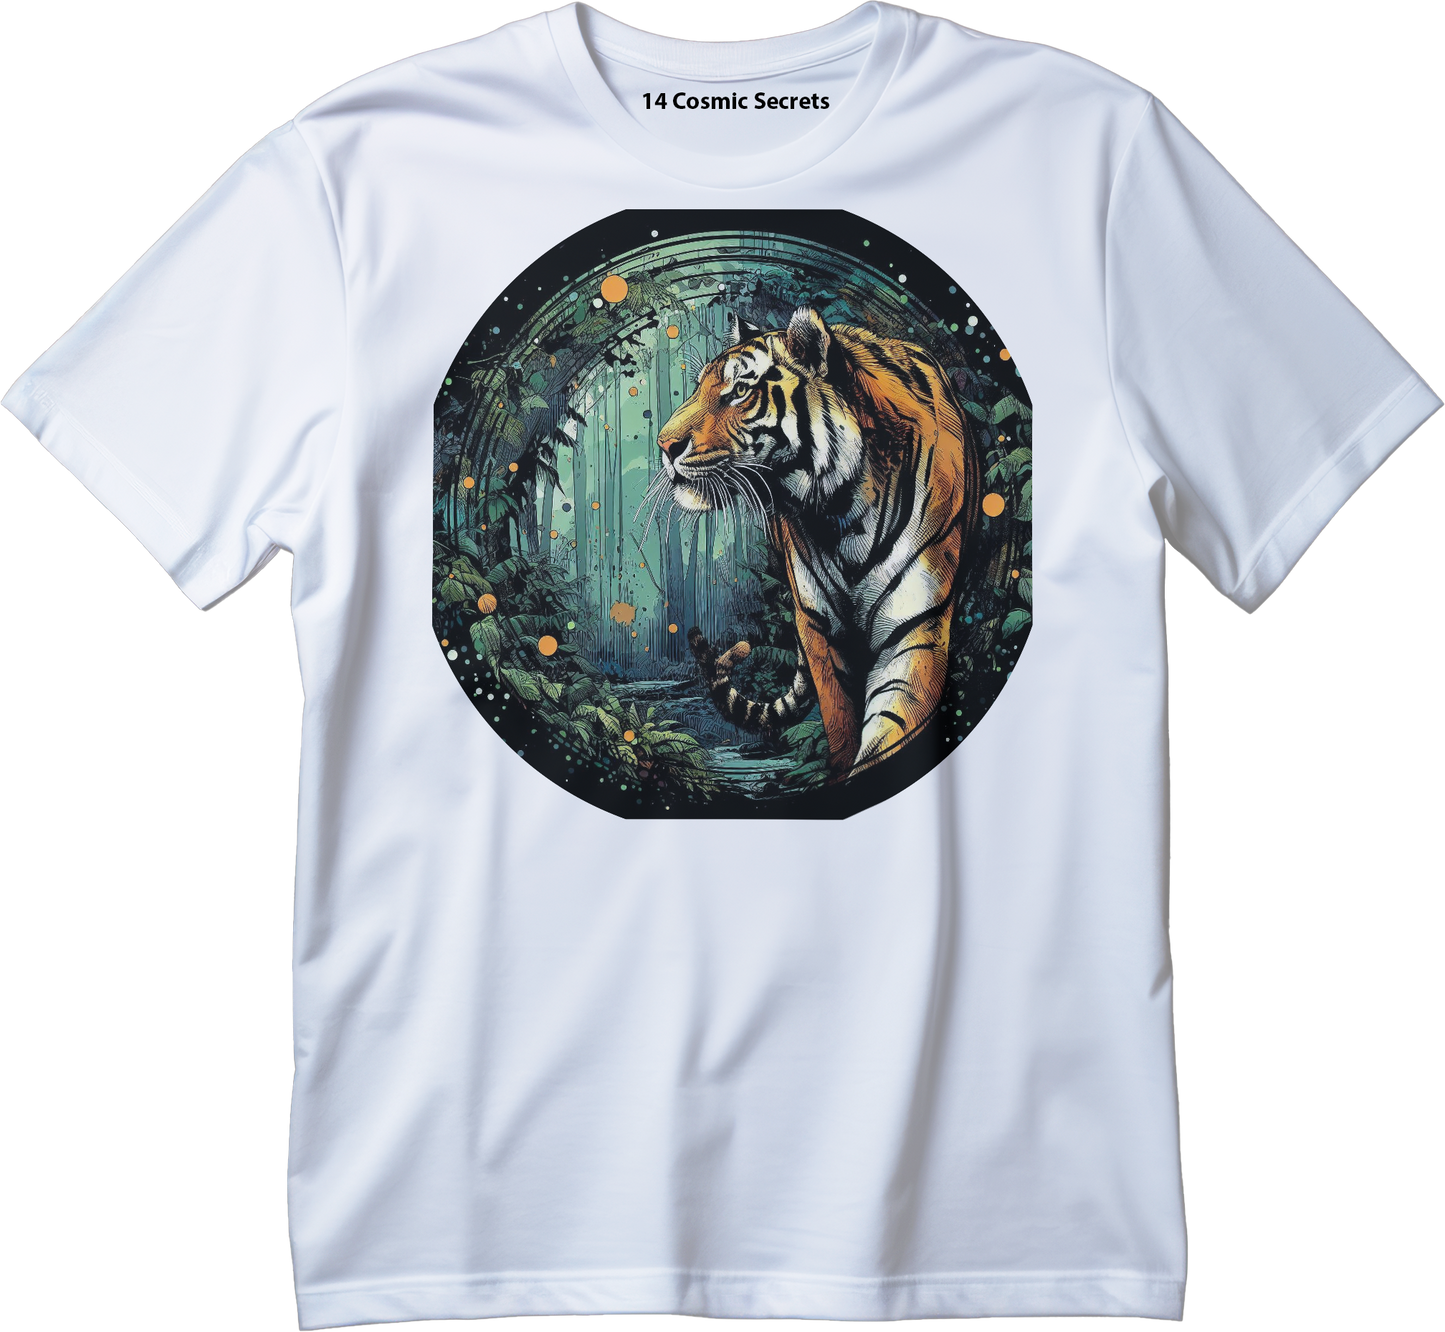 Tiger's Regal Style Graphic Printed T-Shirt  Cotton T-Shirt Magnificence of India T-Shirt